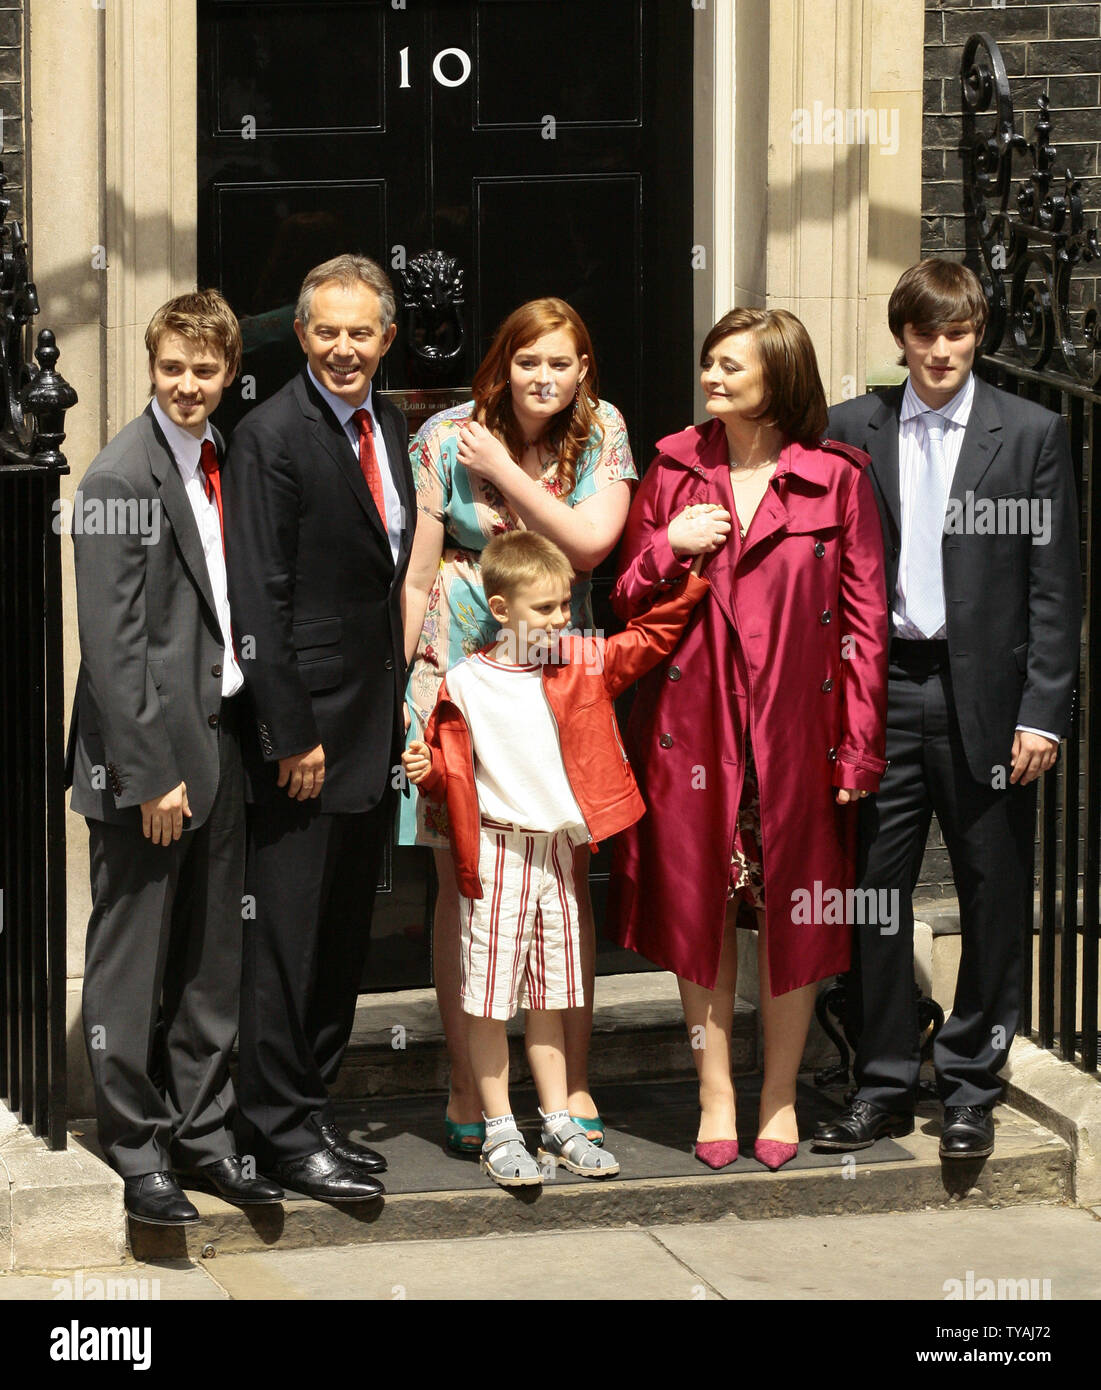 The family of British Prime Minister Tony Blair, Euan, Tony Blair, Kathryn, Leo, Cherie and Nicolas (L to R) face the media on the doorstep of No.10 Downing Street after Tony Blair offered his resignation to Her Majesty the Queen on June 27, 2007. Blair leaves his role as British Prime Minister to become the Envoy to the Middle East after ten years in power. (UPI Photo/Hugo Philpott) Stock Photo